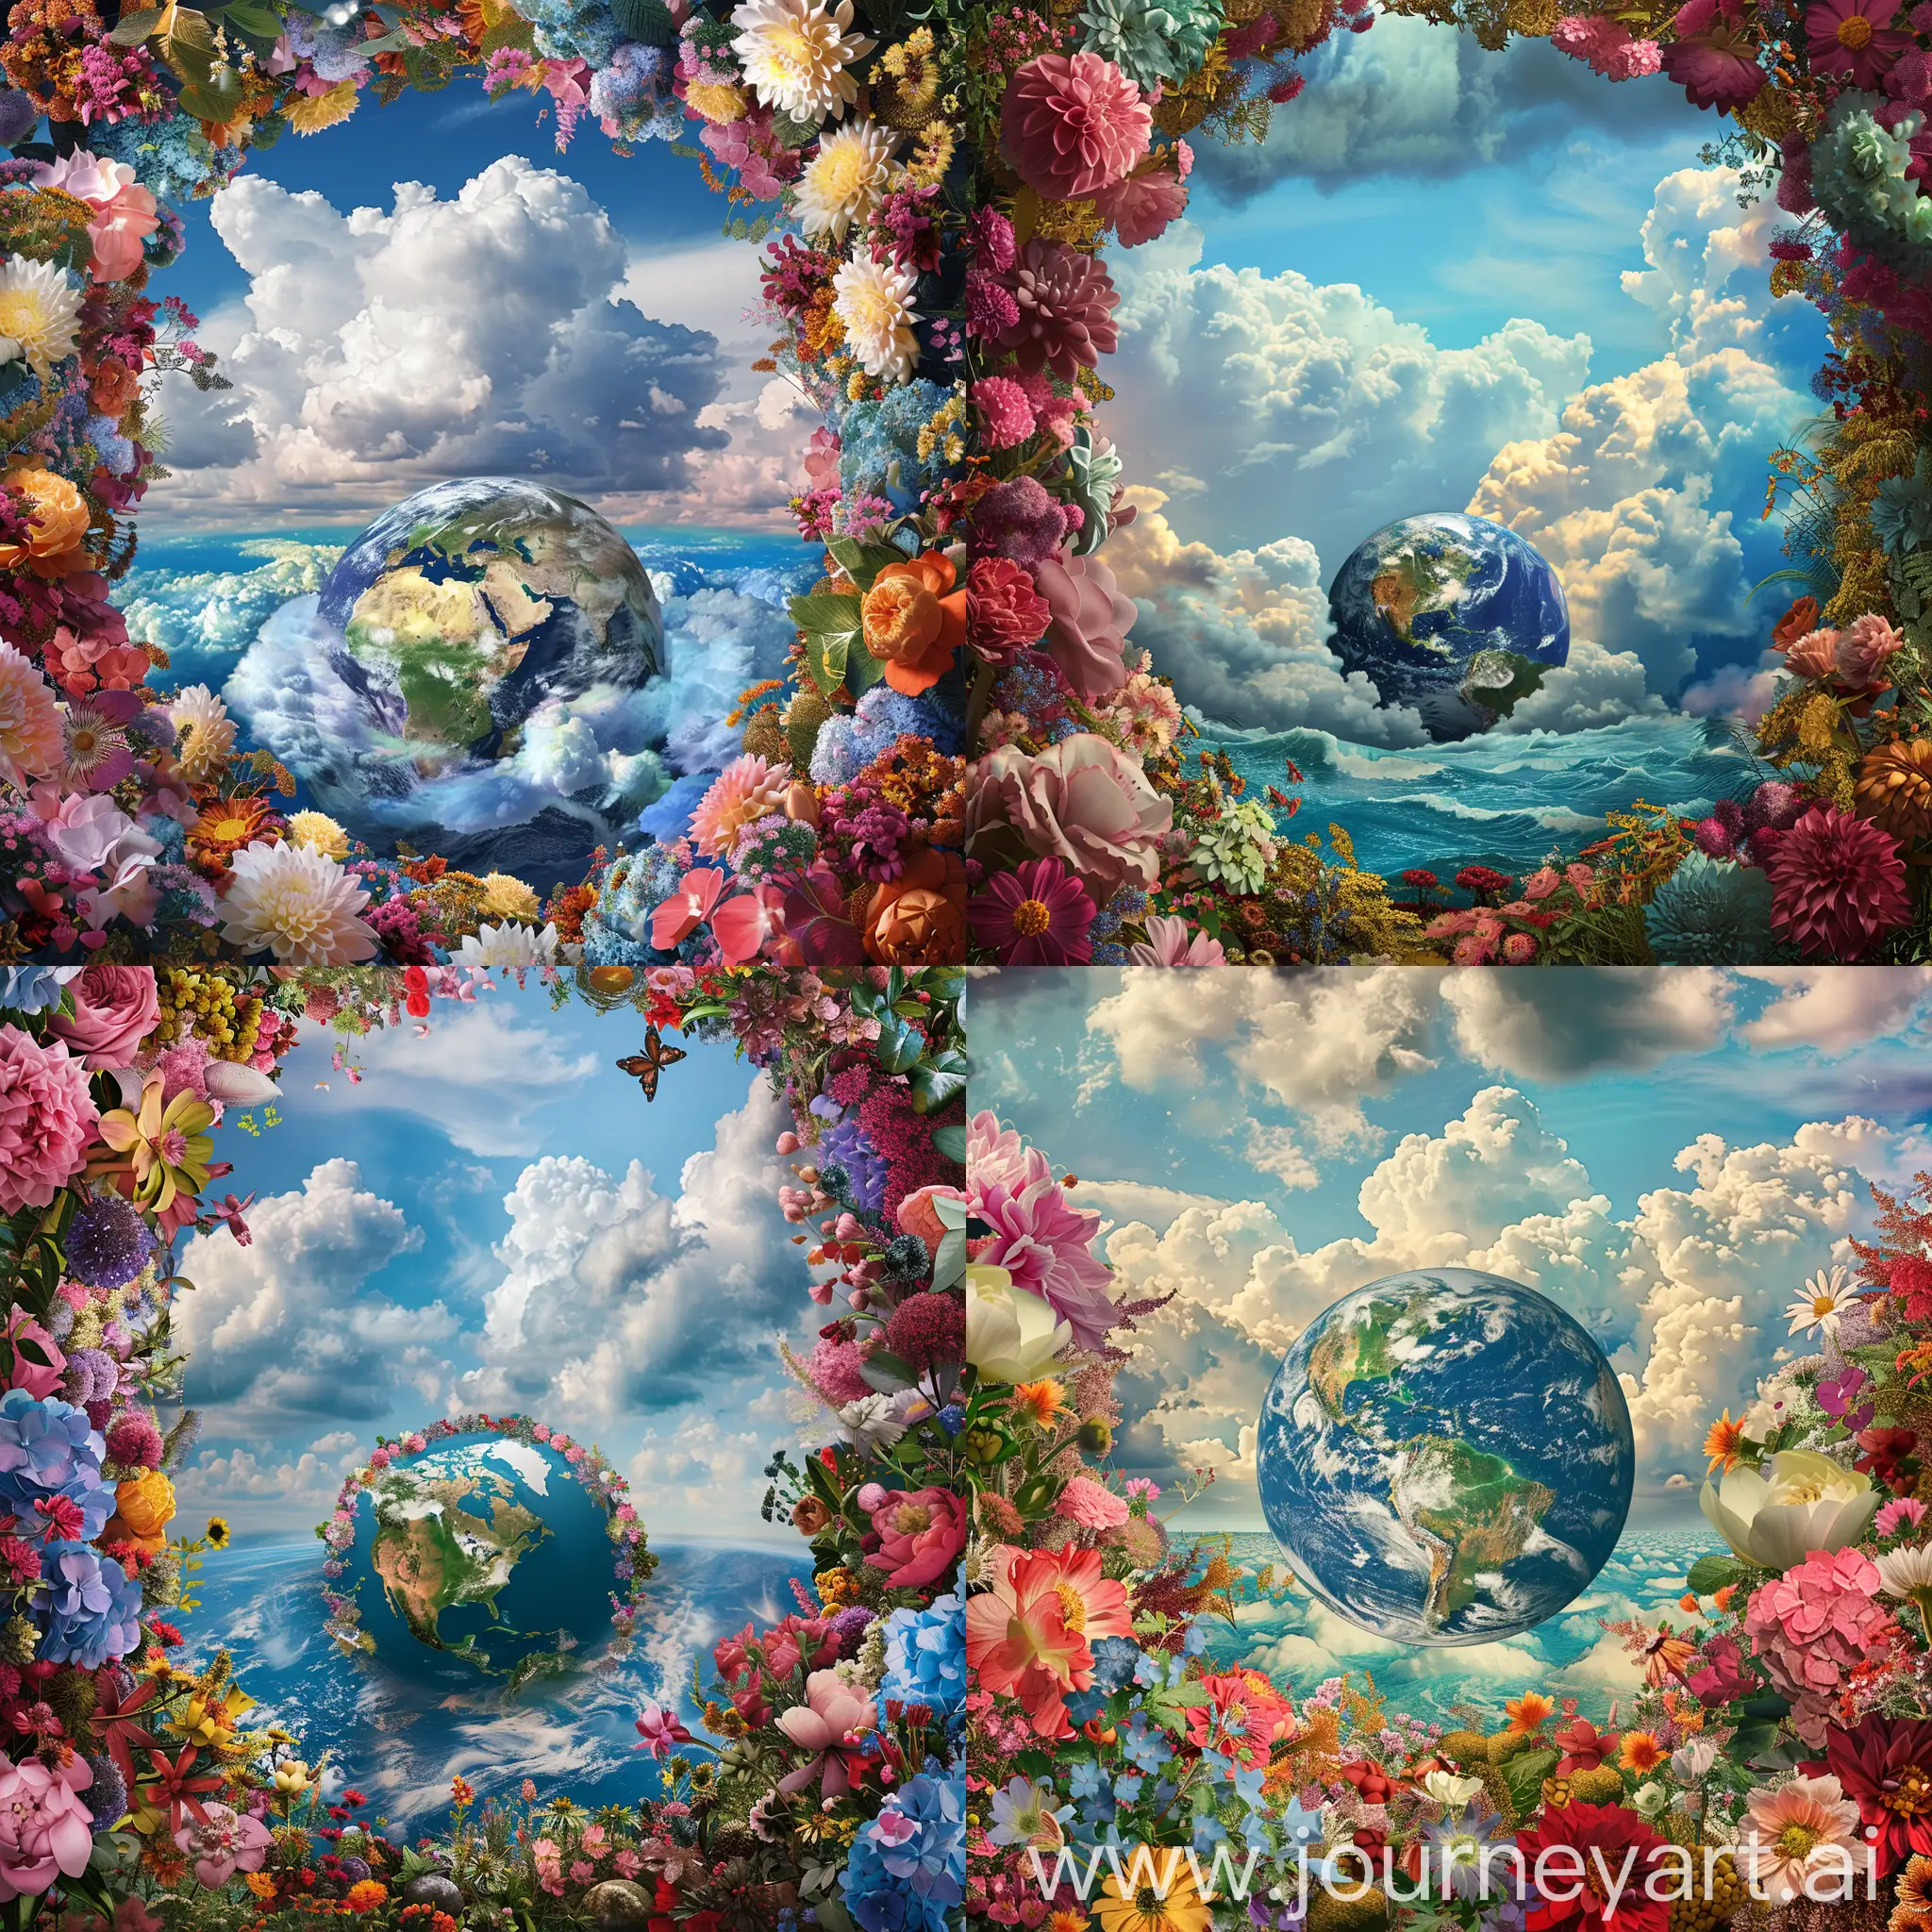 I intend to create an NFT using AI-generated digital collage art. The image I envision depicts the Earth surrounded by beautiful flowers, seas, and dry land. The background should be a cloudy blue sky, adding a special allure. Here are the color patterns I have in mind:
The image type is digital collage art.
1. For the beautiful flowers:
- Pink: #ff69b4
- Red: #ff0000
- Yellow: #ffff00
- Purple: #800080
2. For the seas:
- Blue: #0000ff
- Sky Blue: #1e90ff
- Dark Blue: #006400
3. For the dry land:
- Brown: #8b4513
- Emerald: #008000
- Crimson: #dc143c
4. For the background sky image, you can use the HEX color code #6a5acd.
